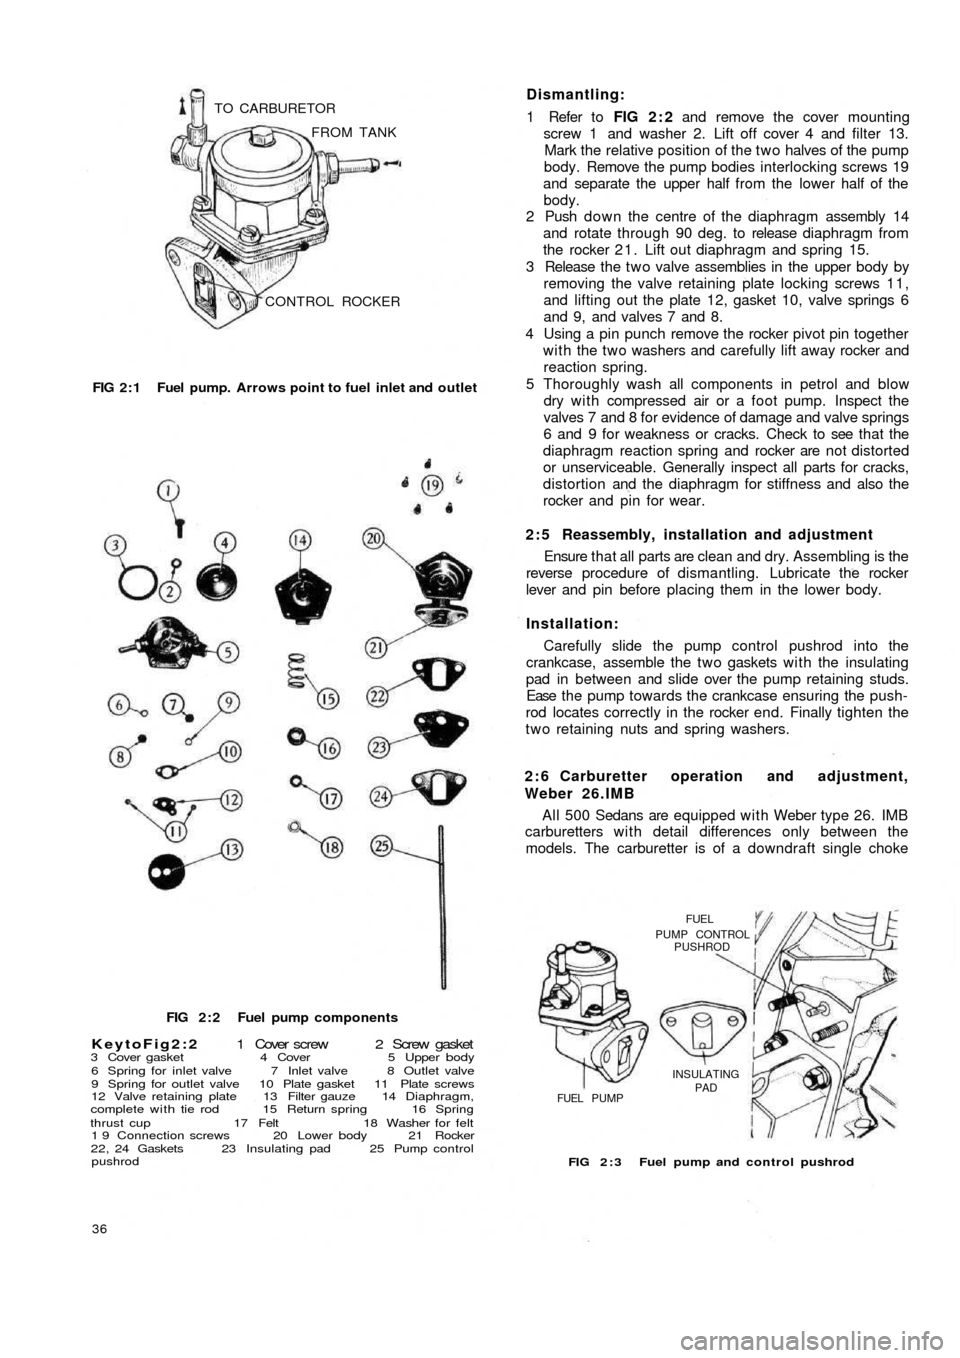 FIAT 500 1965 1.G Workshop Manual CONTROL ROCKER FROM TANK TO CARBURETOR
FIG 2 : 1  Fuel pump. Arrows point to fuel  inlet and outlet
FIG 2 : 2  Fuel pump components
KeytoFig2:2 1  Cover  screw  2  Screw  gasket3 Cover gasket 4 Cover 